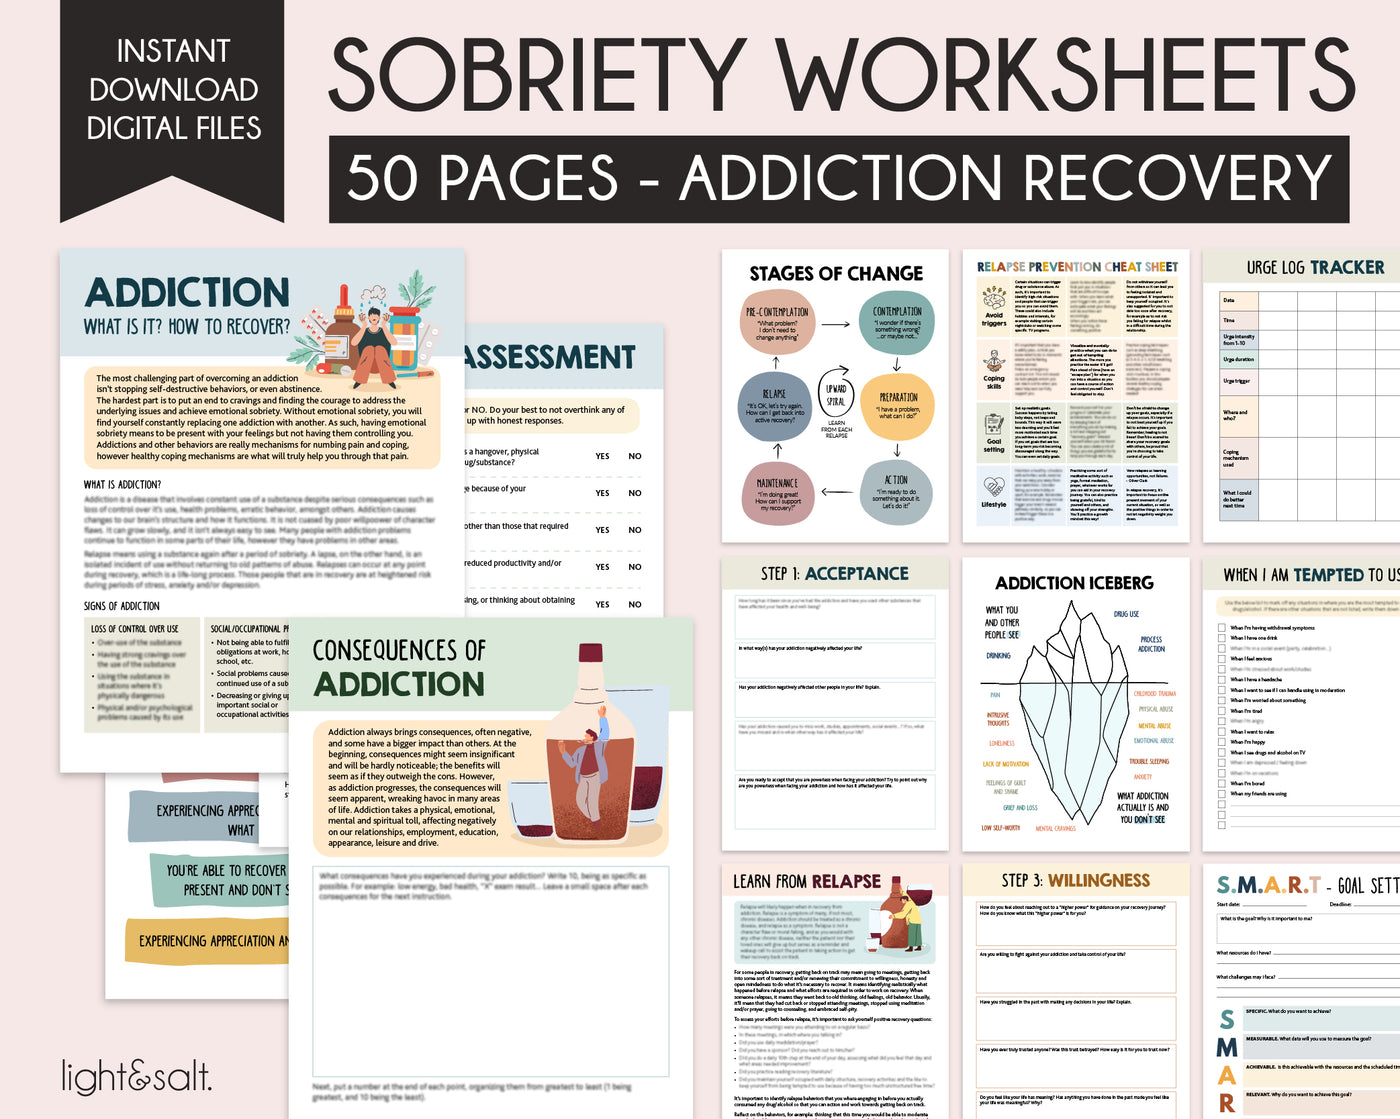 Sobriety mega bundle, addiction and recovery therapy resources